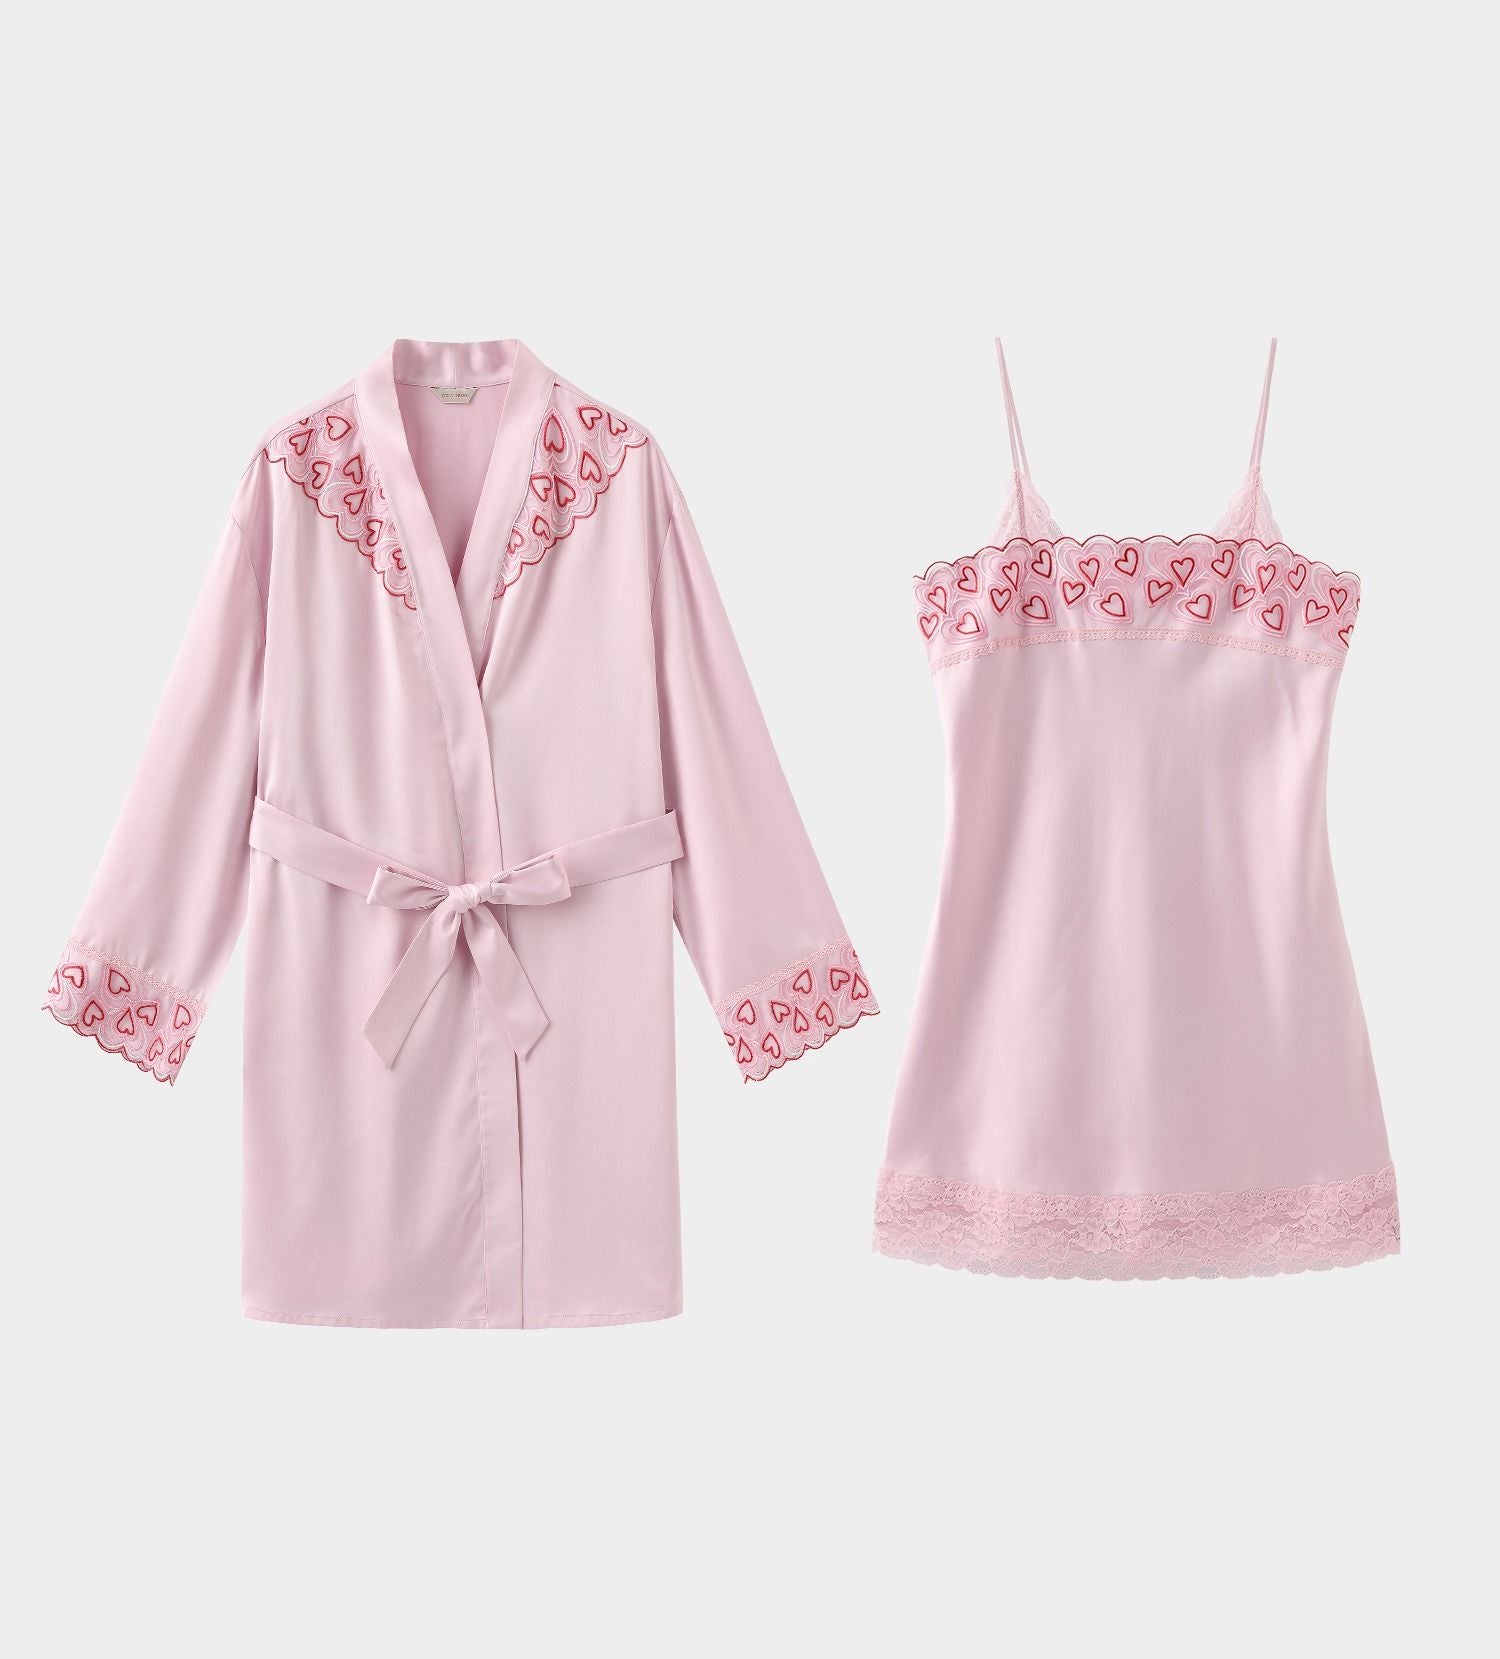 Sheer Lace Chemise Nightgown And Robe Set - chiclara